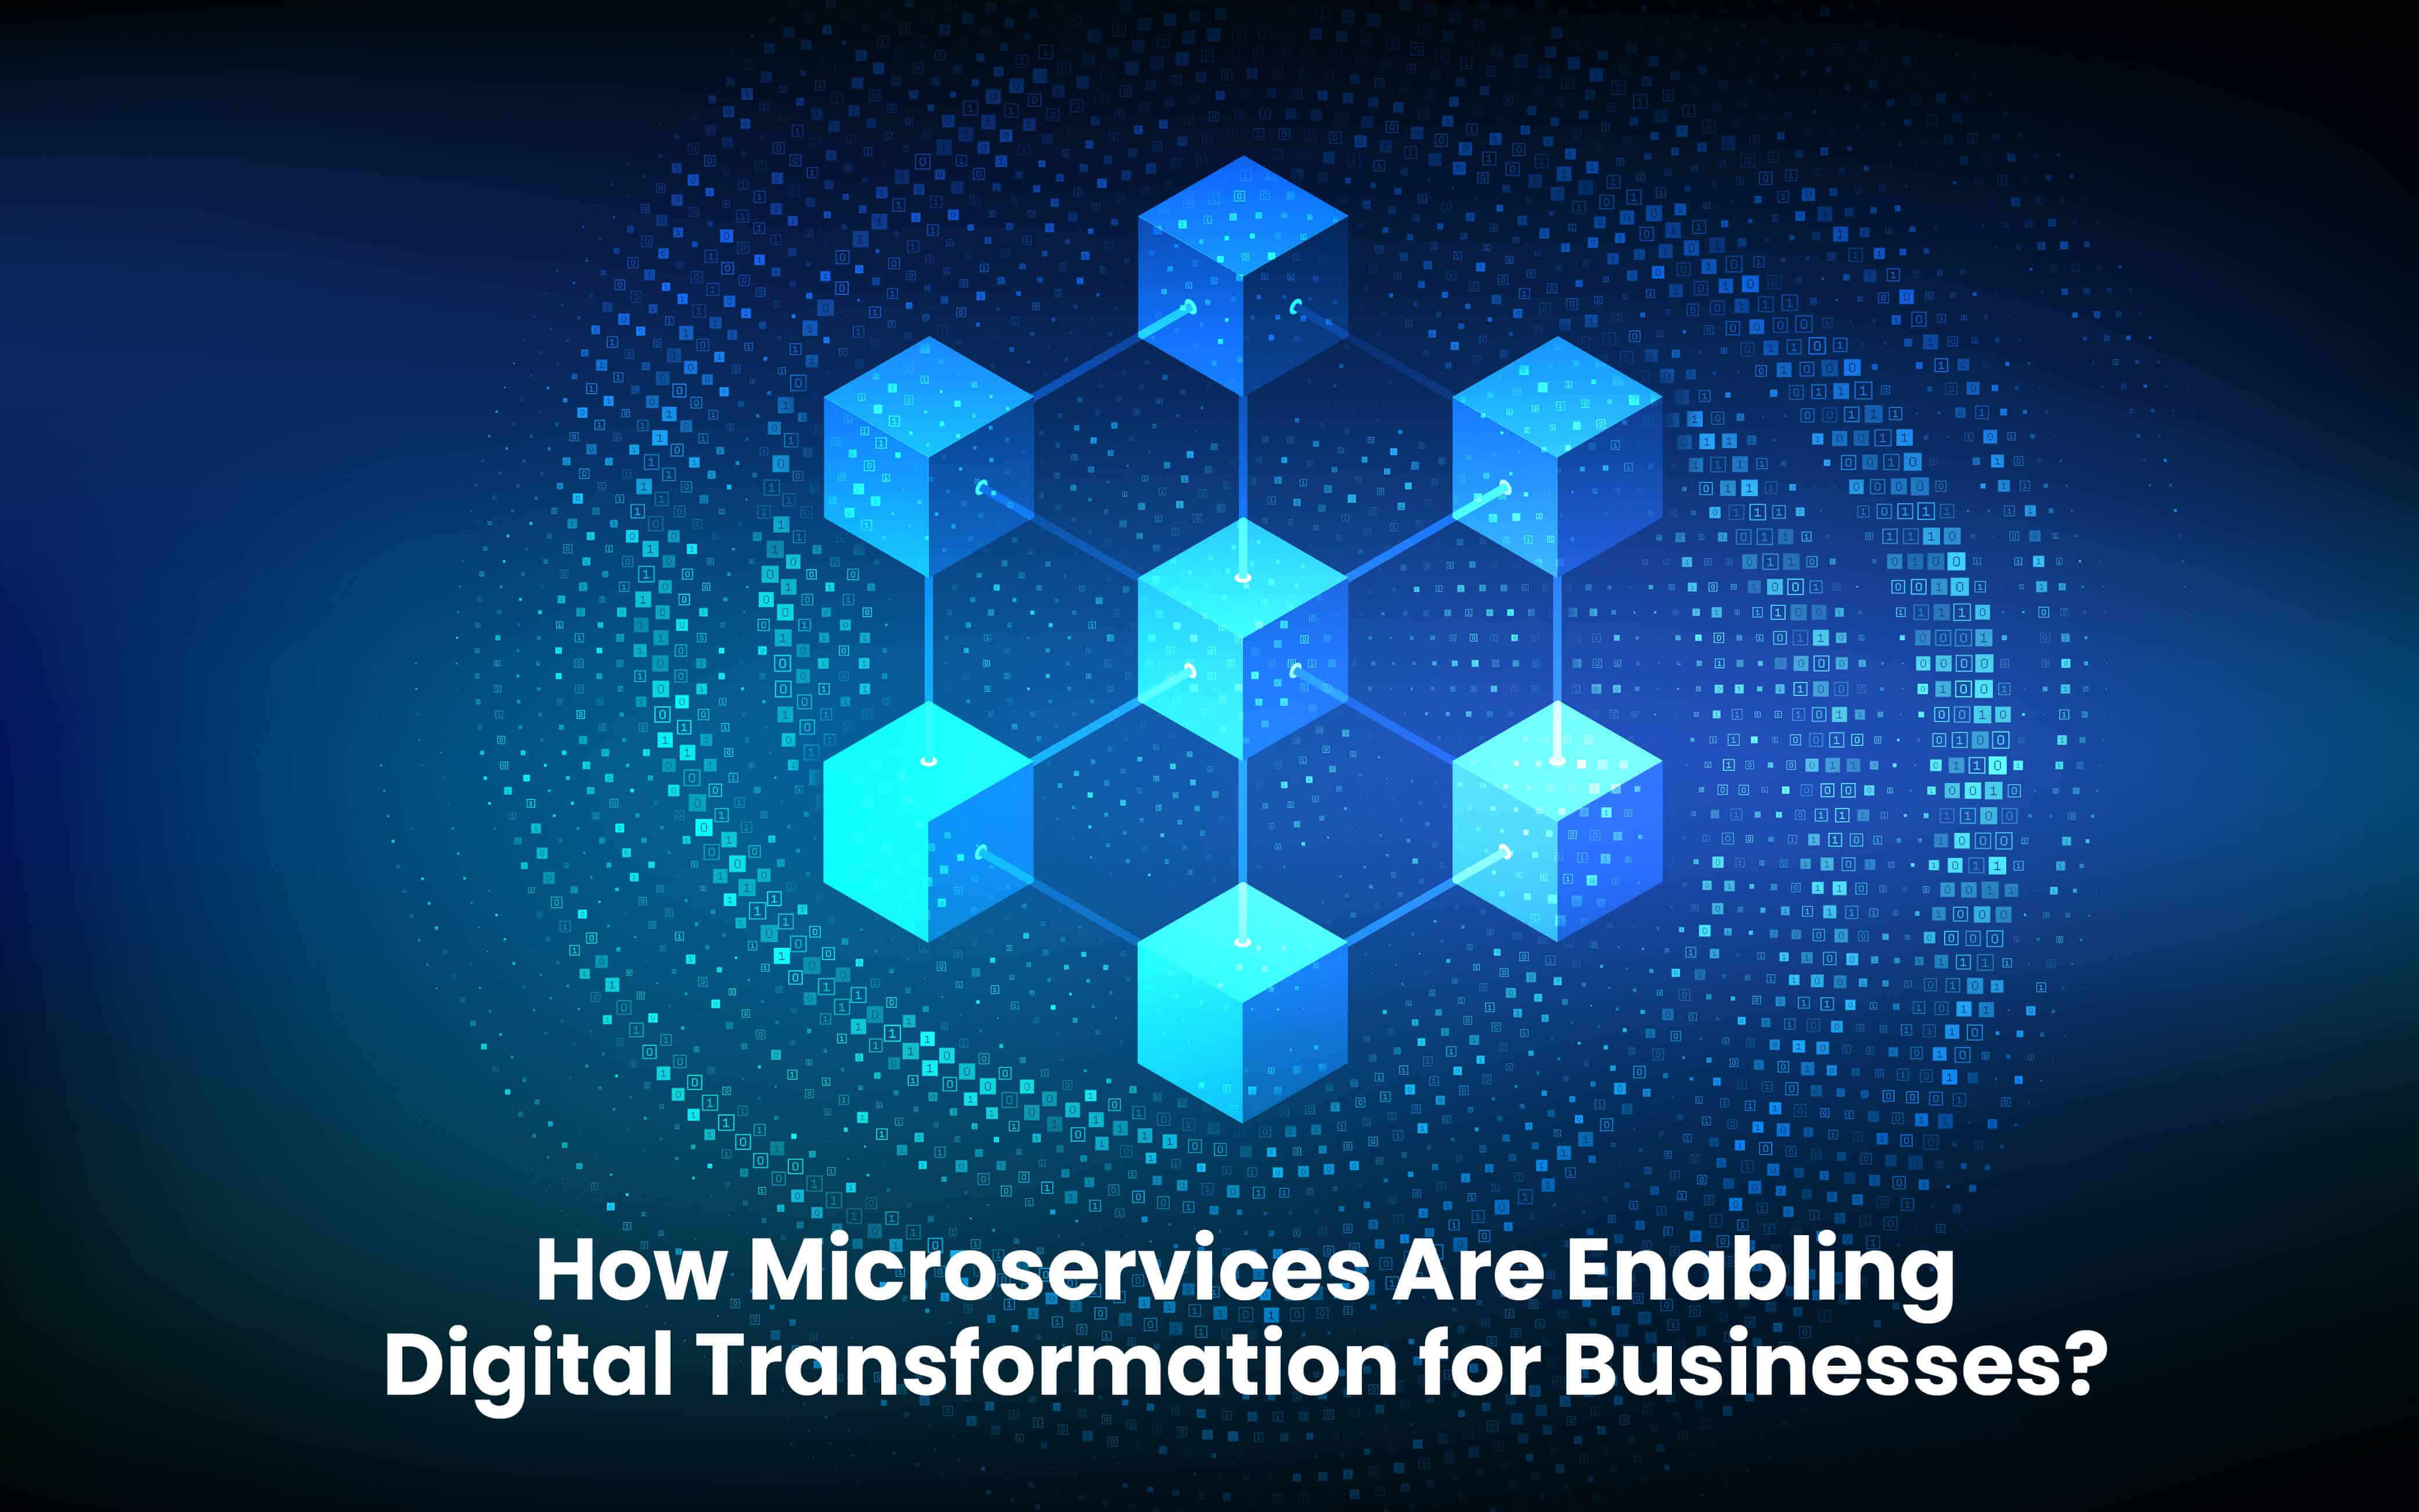 How Microservices Are Enabling Digital Transformation for Businesses?